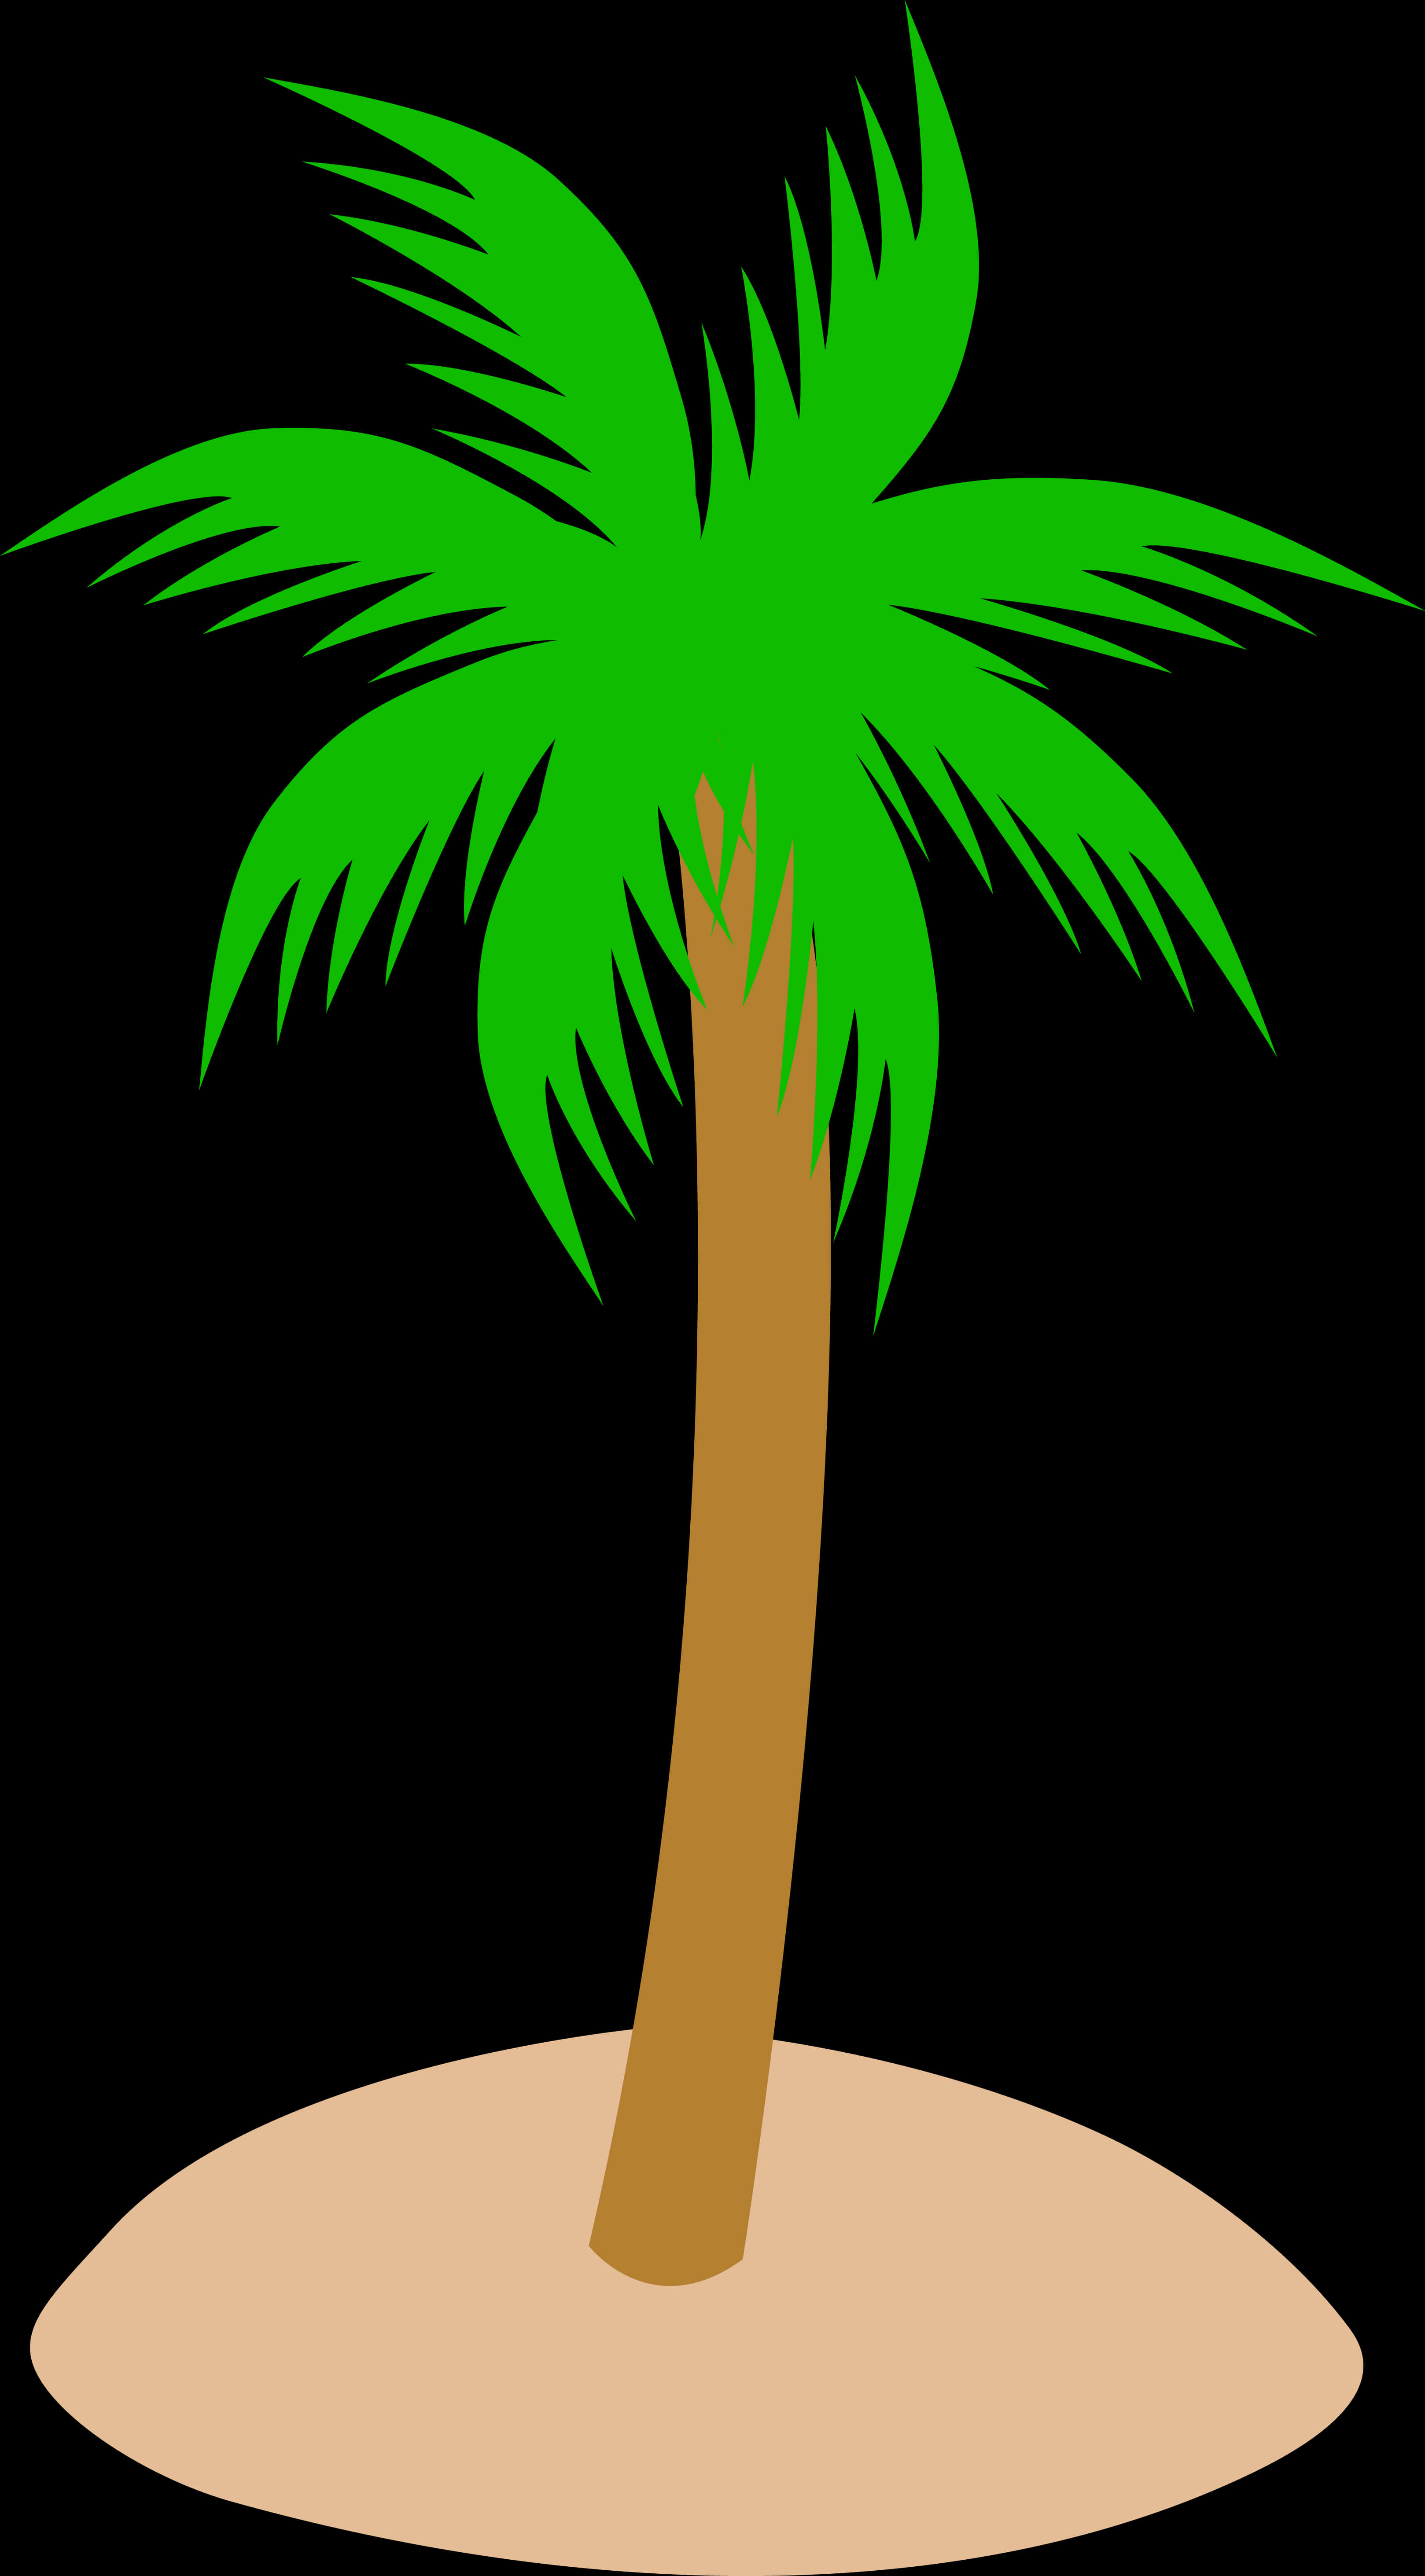 Tropical Palm Tree Graphic PNG